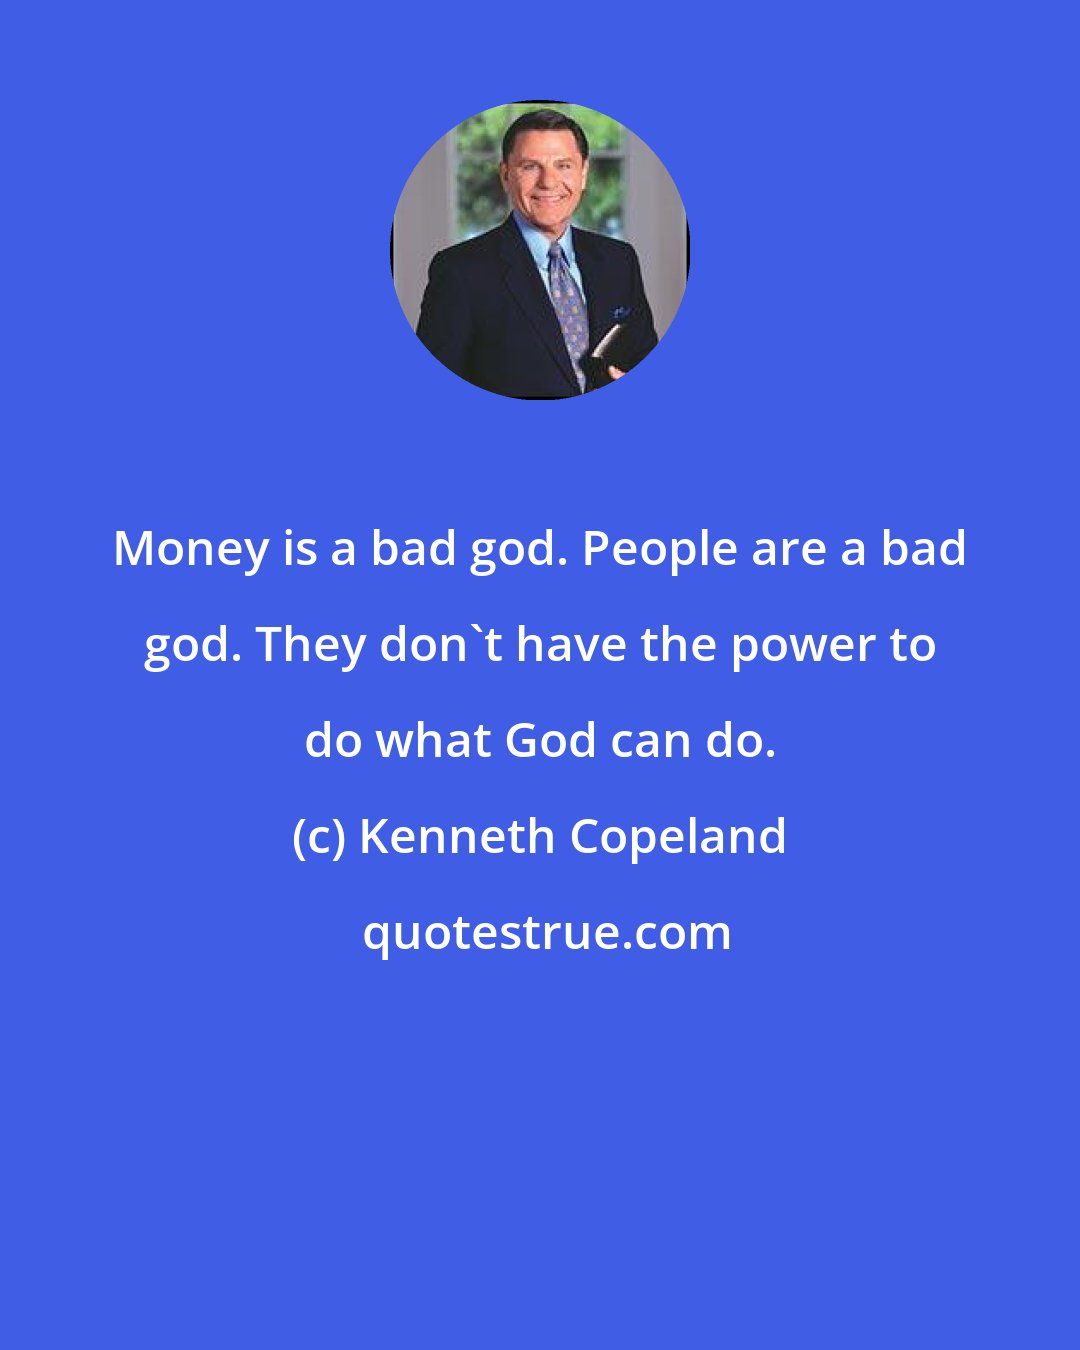 Kenneth Copeland: Money is a bad god. People are a bad god. They don't have the power to do what God can do.